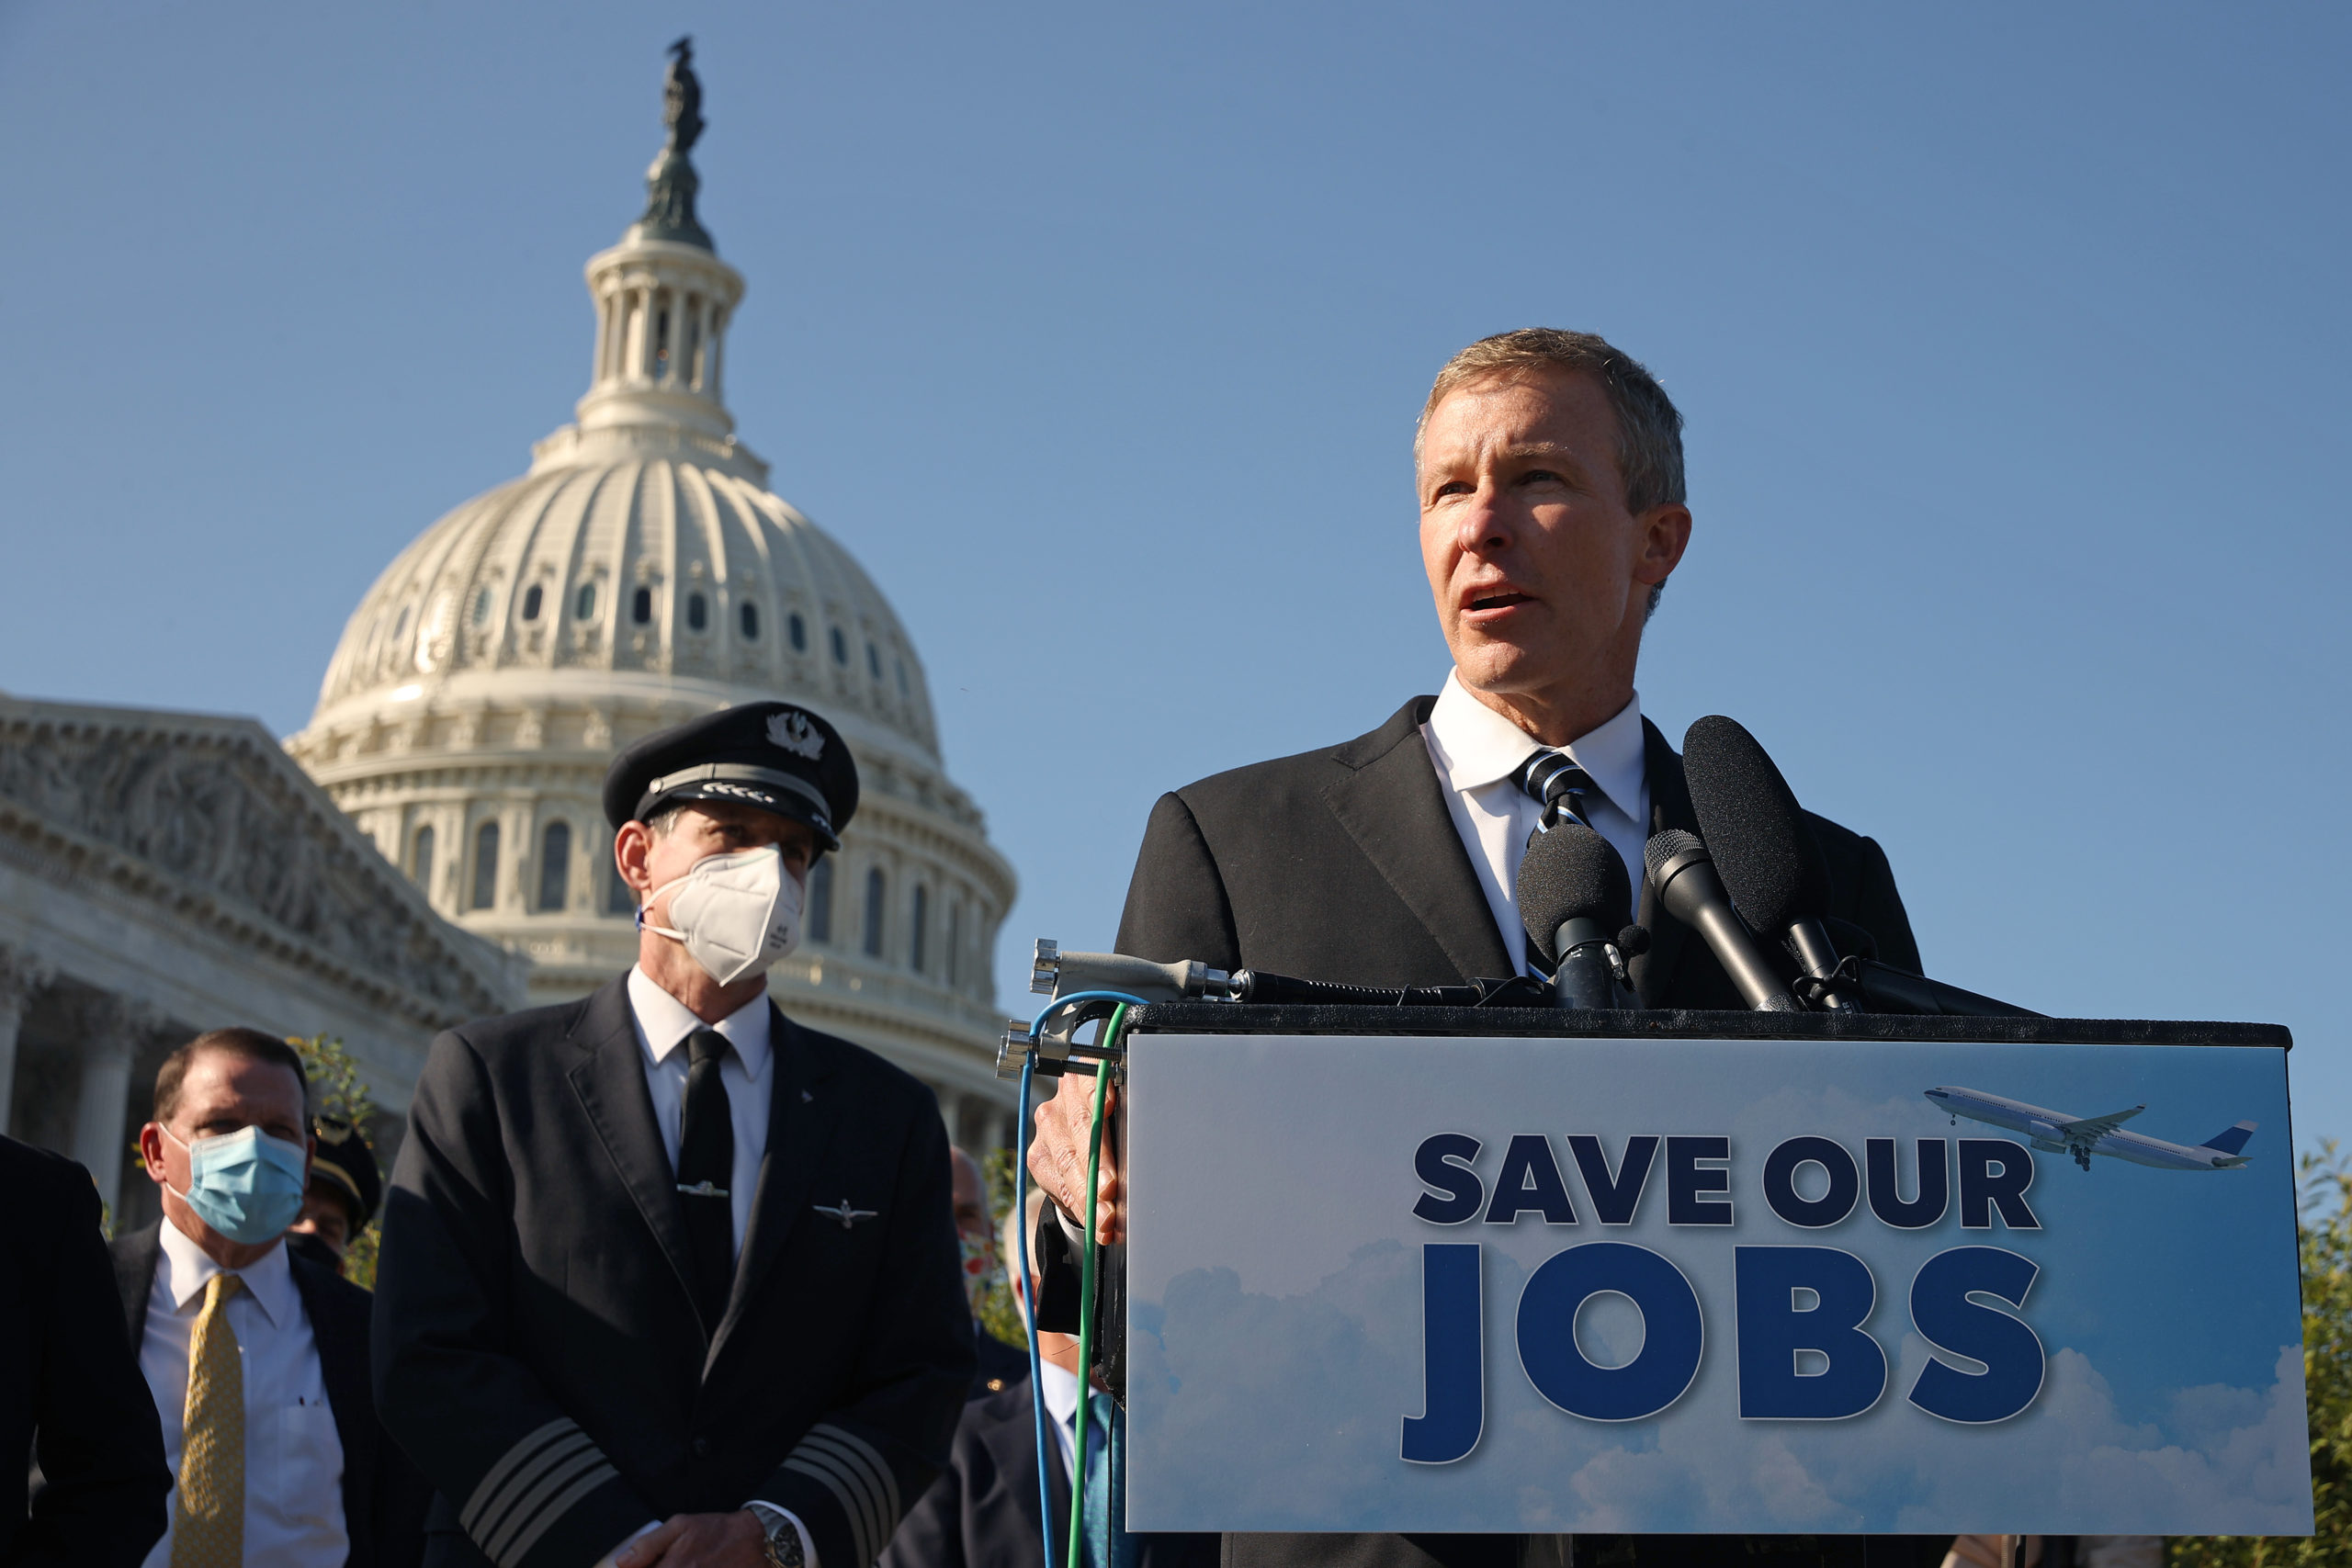 United Airlines CEO Scott Kirby speaks during a news conference outside the U.S. Capitol on Sept. 22, 2020. (Chip Somodevilla/Getty Images)